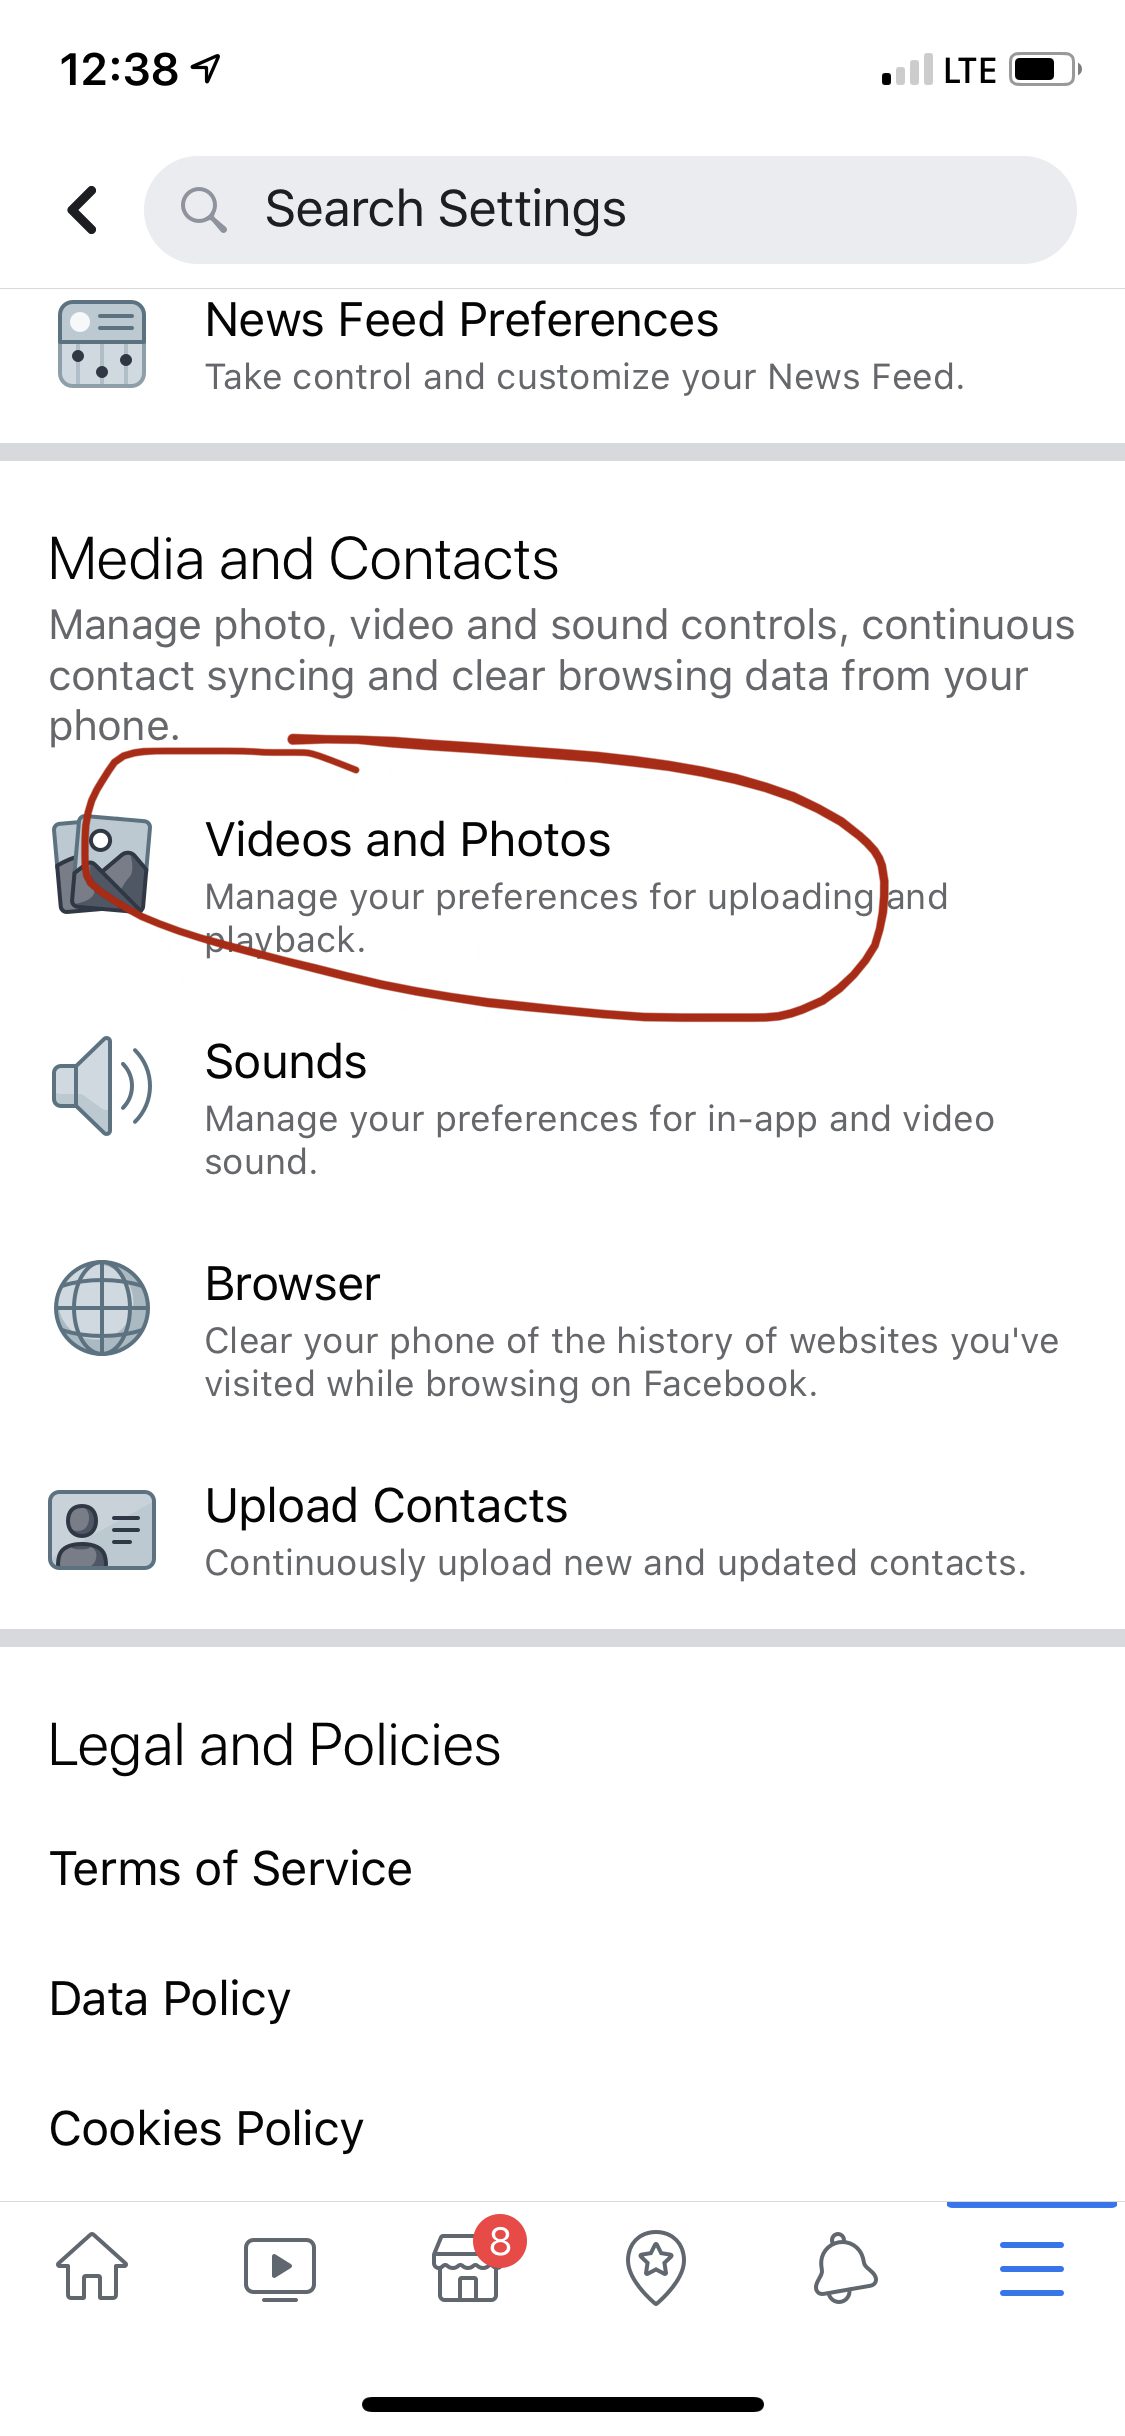 How to Fix Blurry Facebook photos Why are my images blurry when I